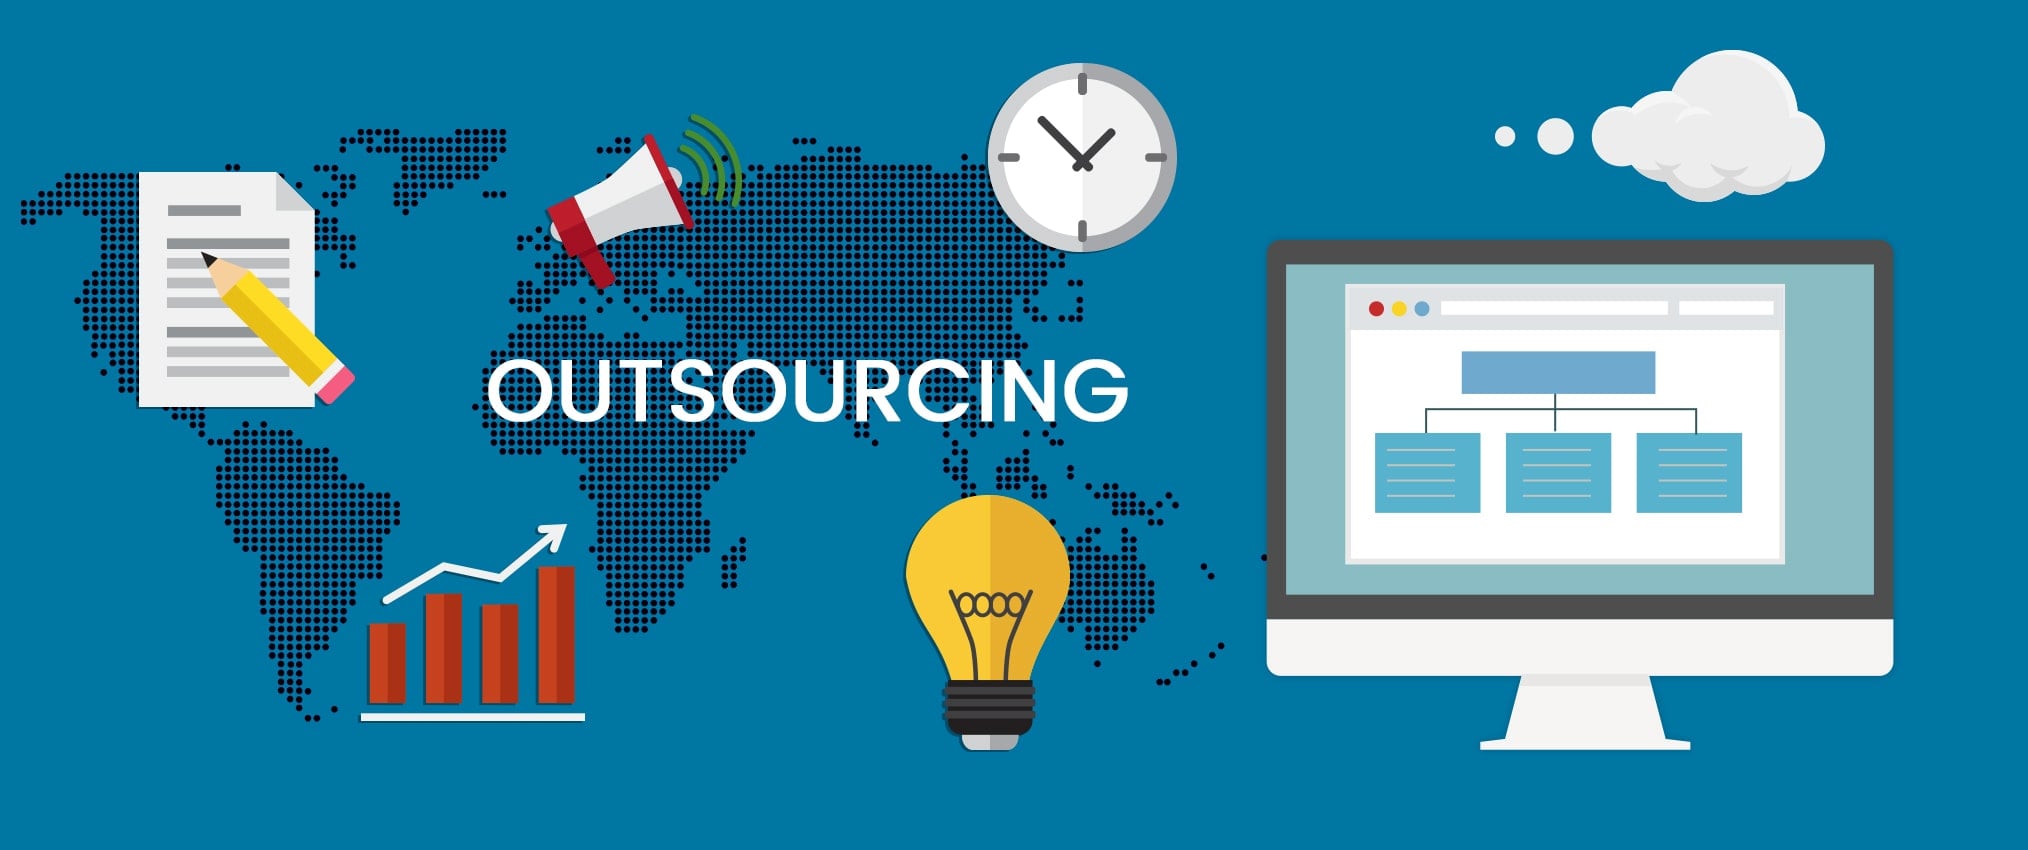 the-important-5ps-of-outsourcing